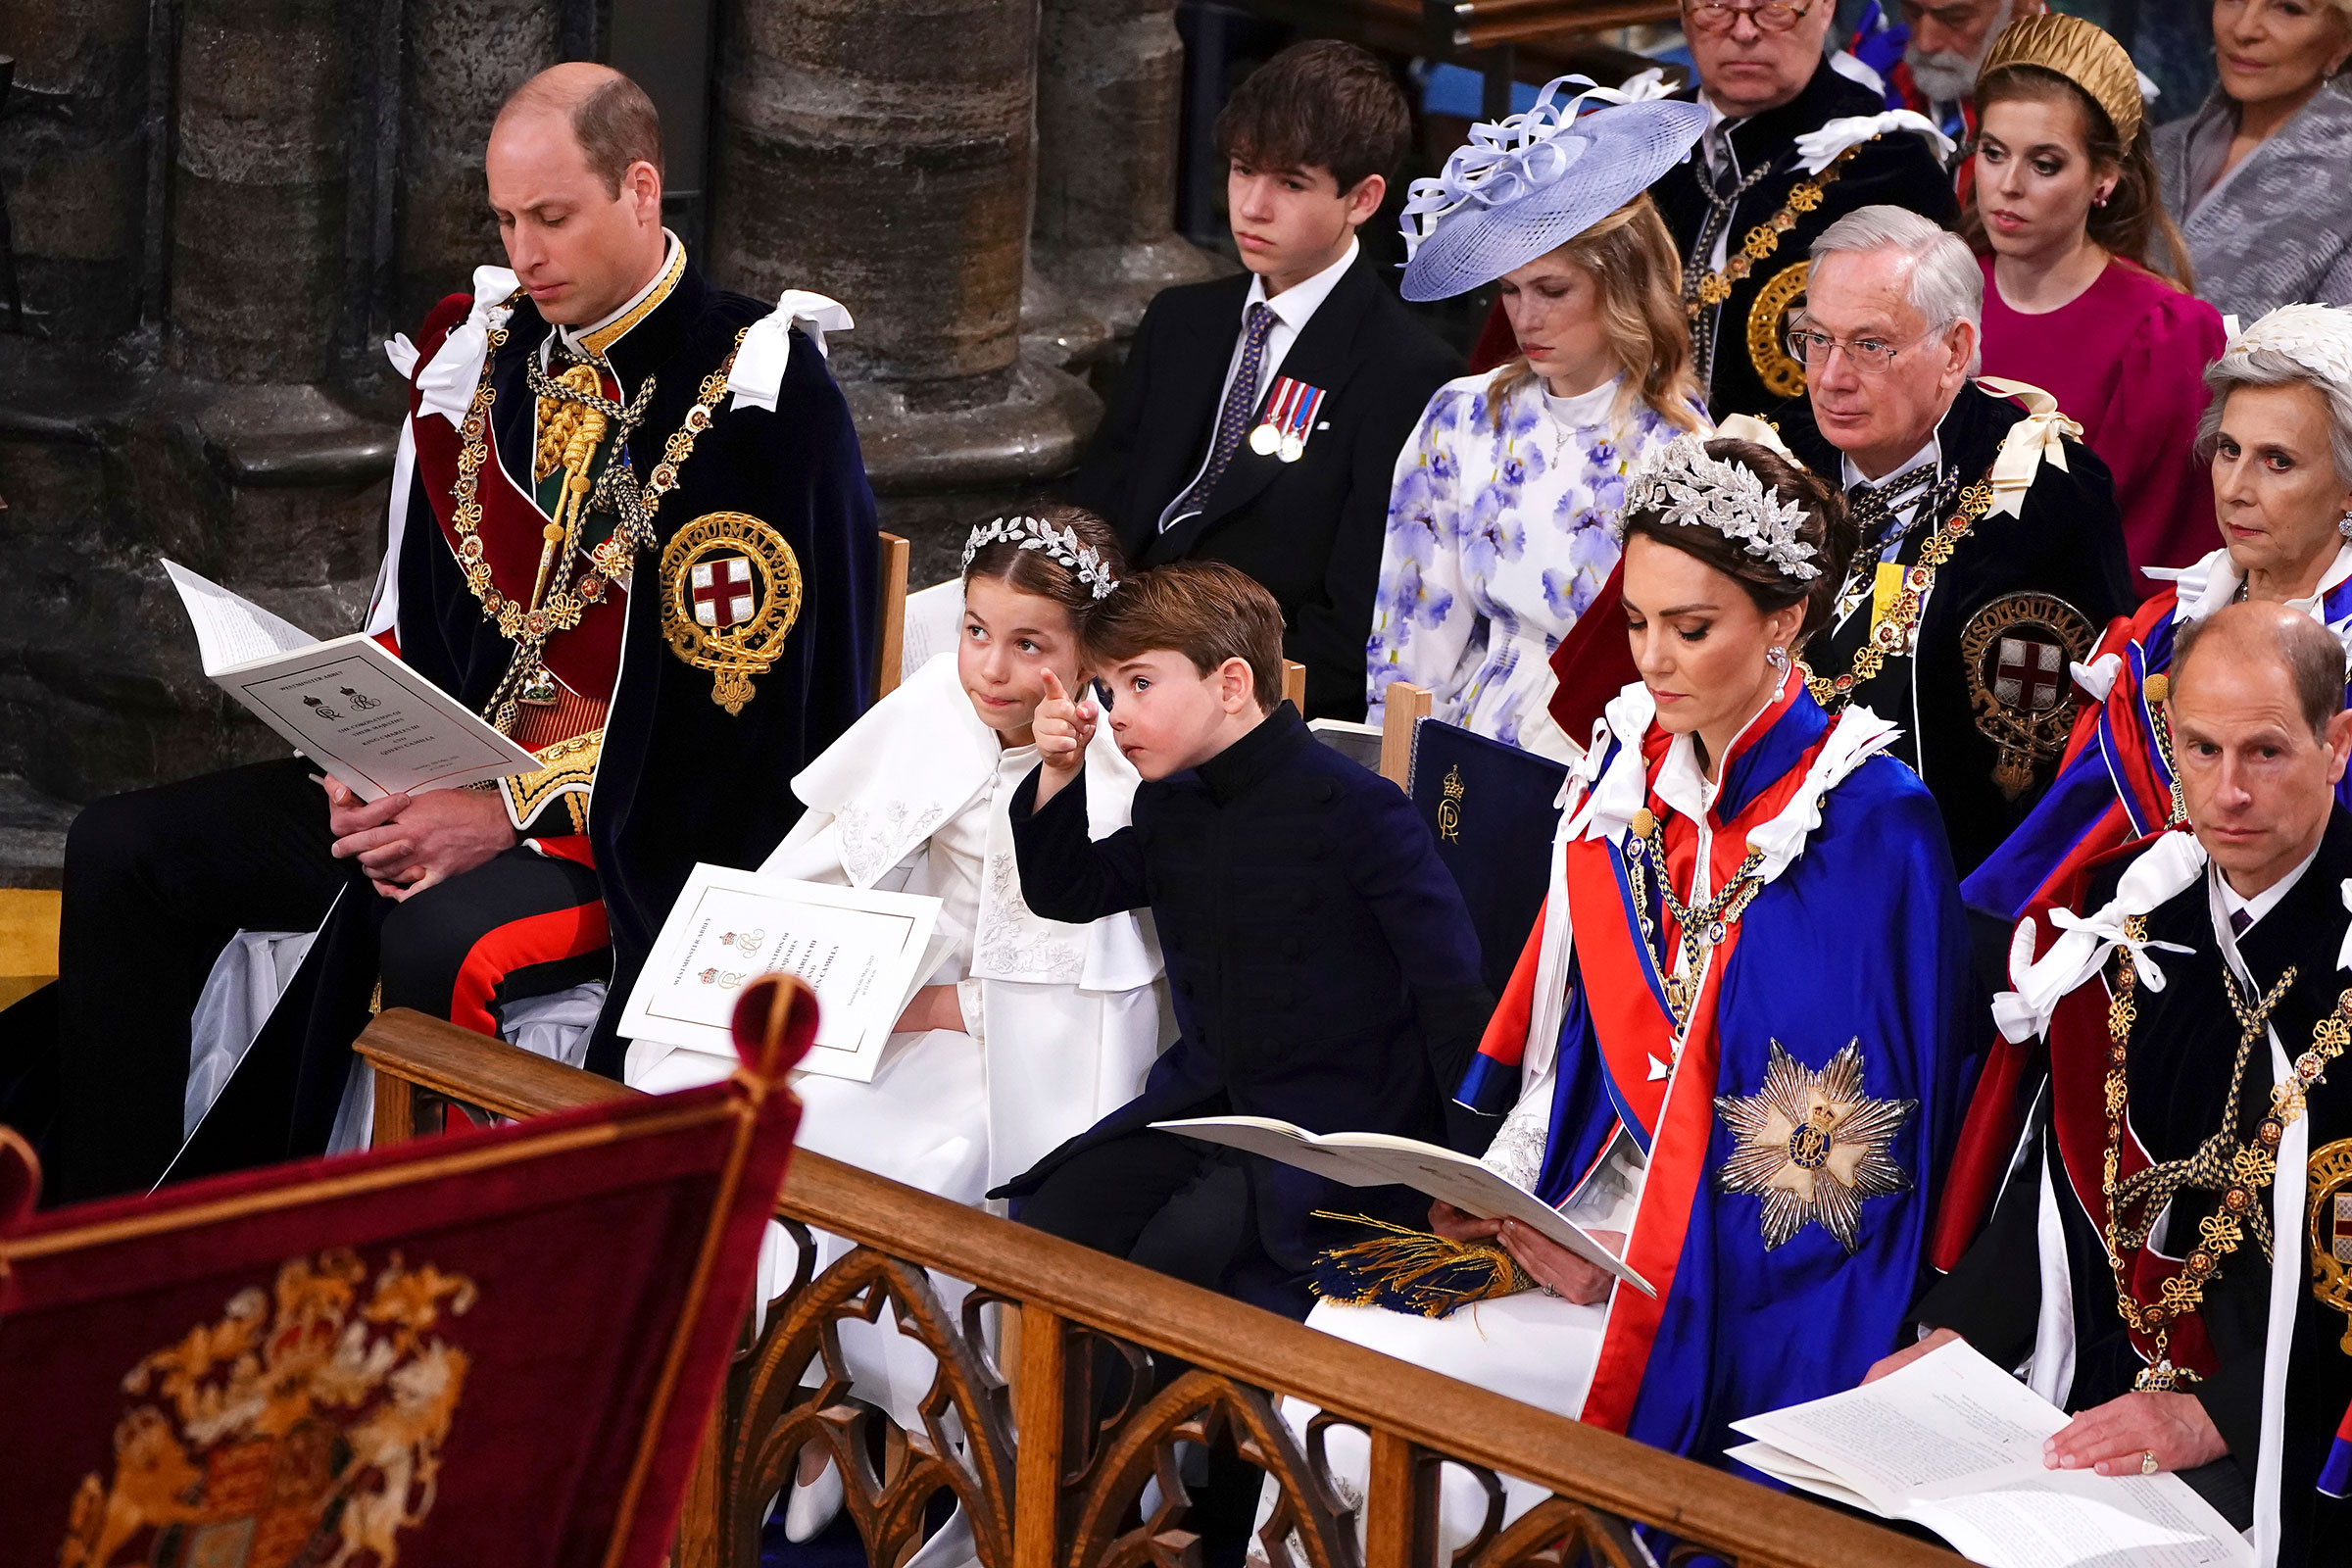 Prince of Wales, Princess Charlotte, Prince Louis, the Princess of Wales and the Duke of Edinburgh at the coronation ceremony of King Charles III. (Yui Mok—PA Wire/AP)